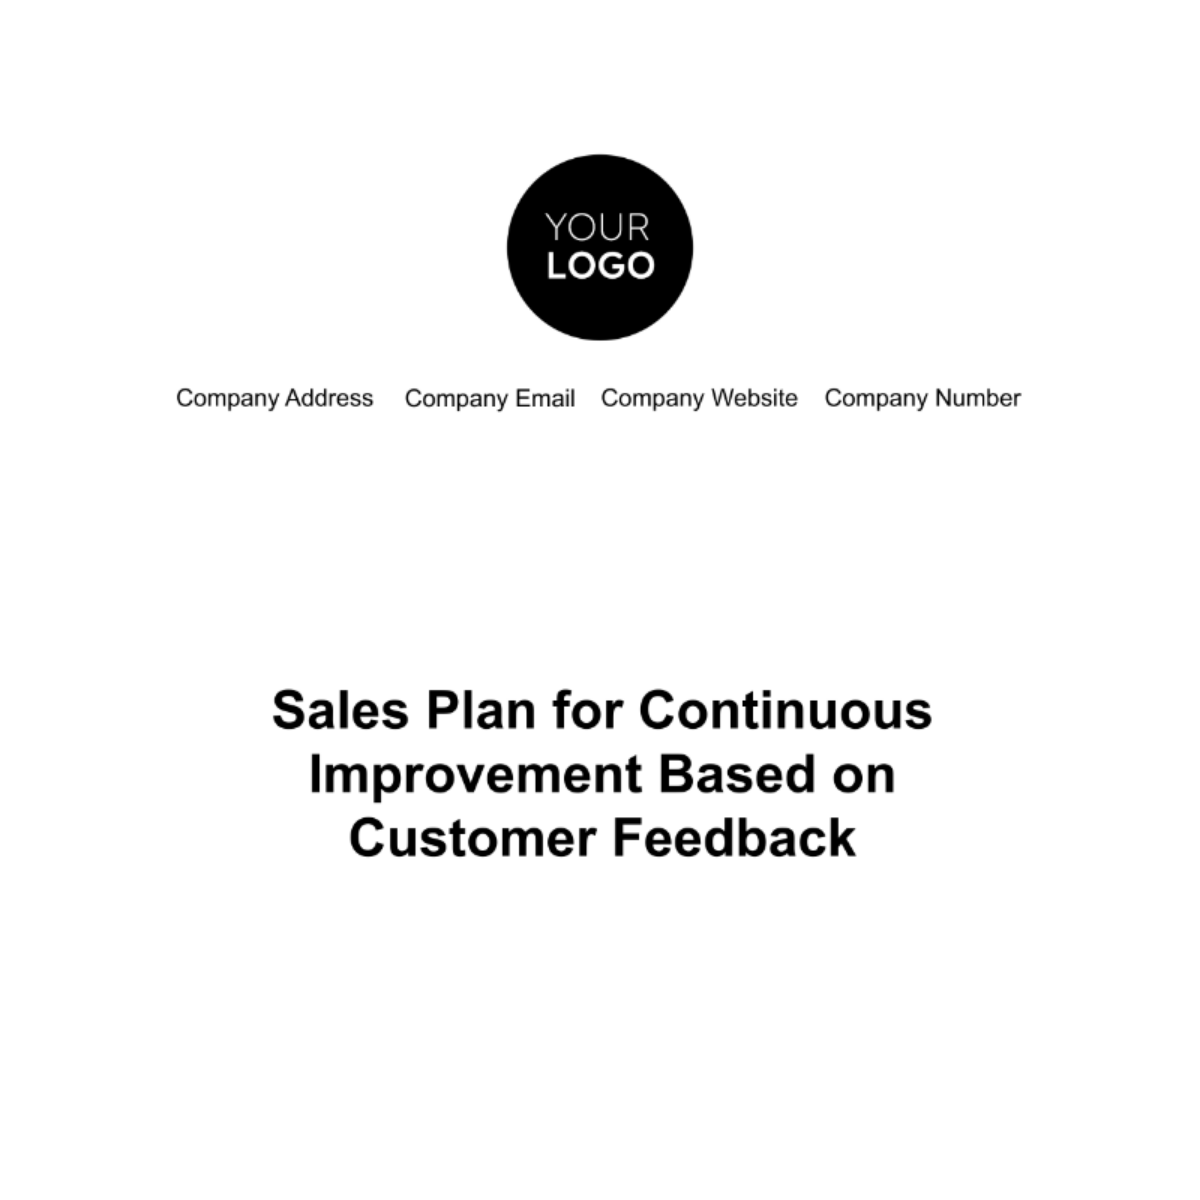 Free Sales Plan for Continuous Improvement Based on Customer Feedback Template